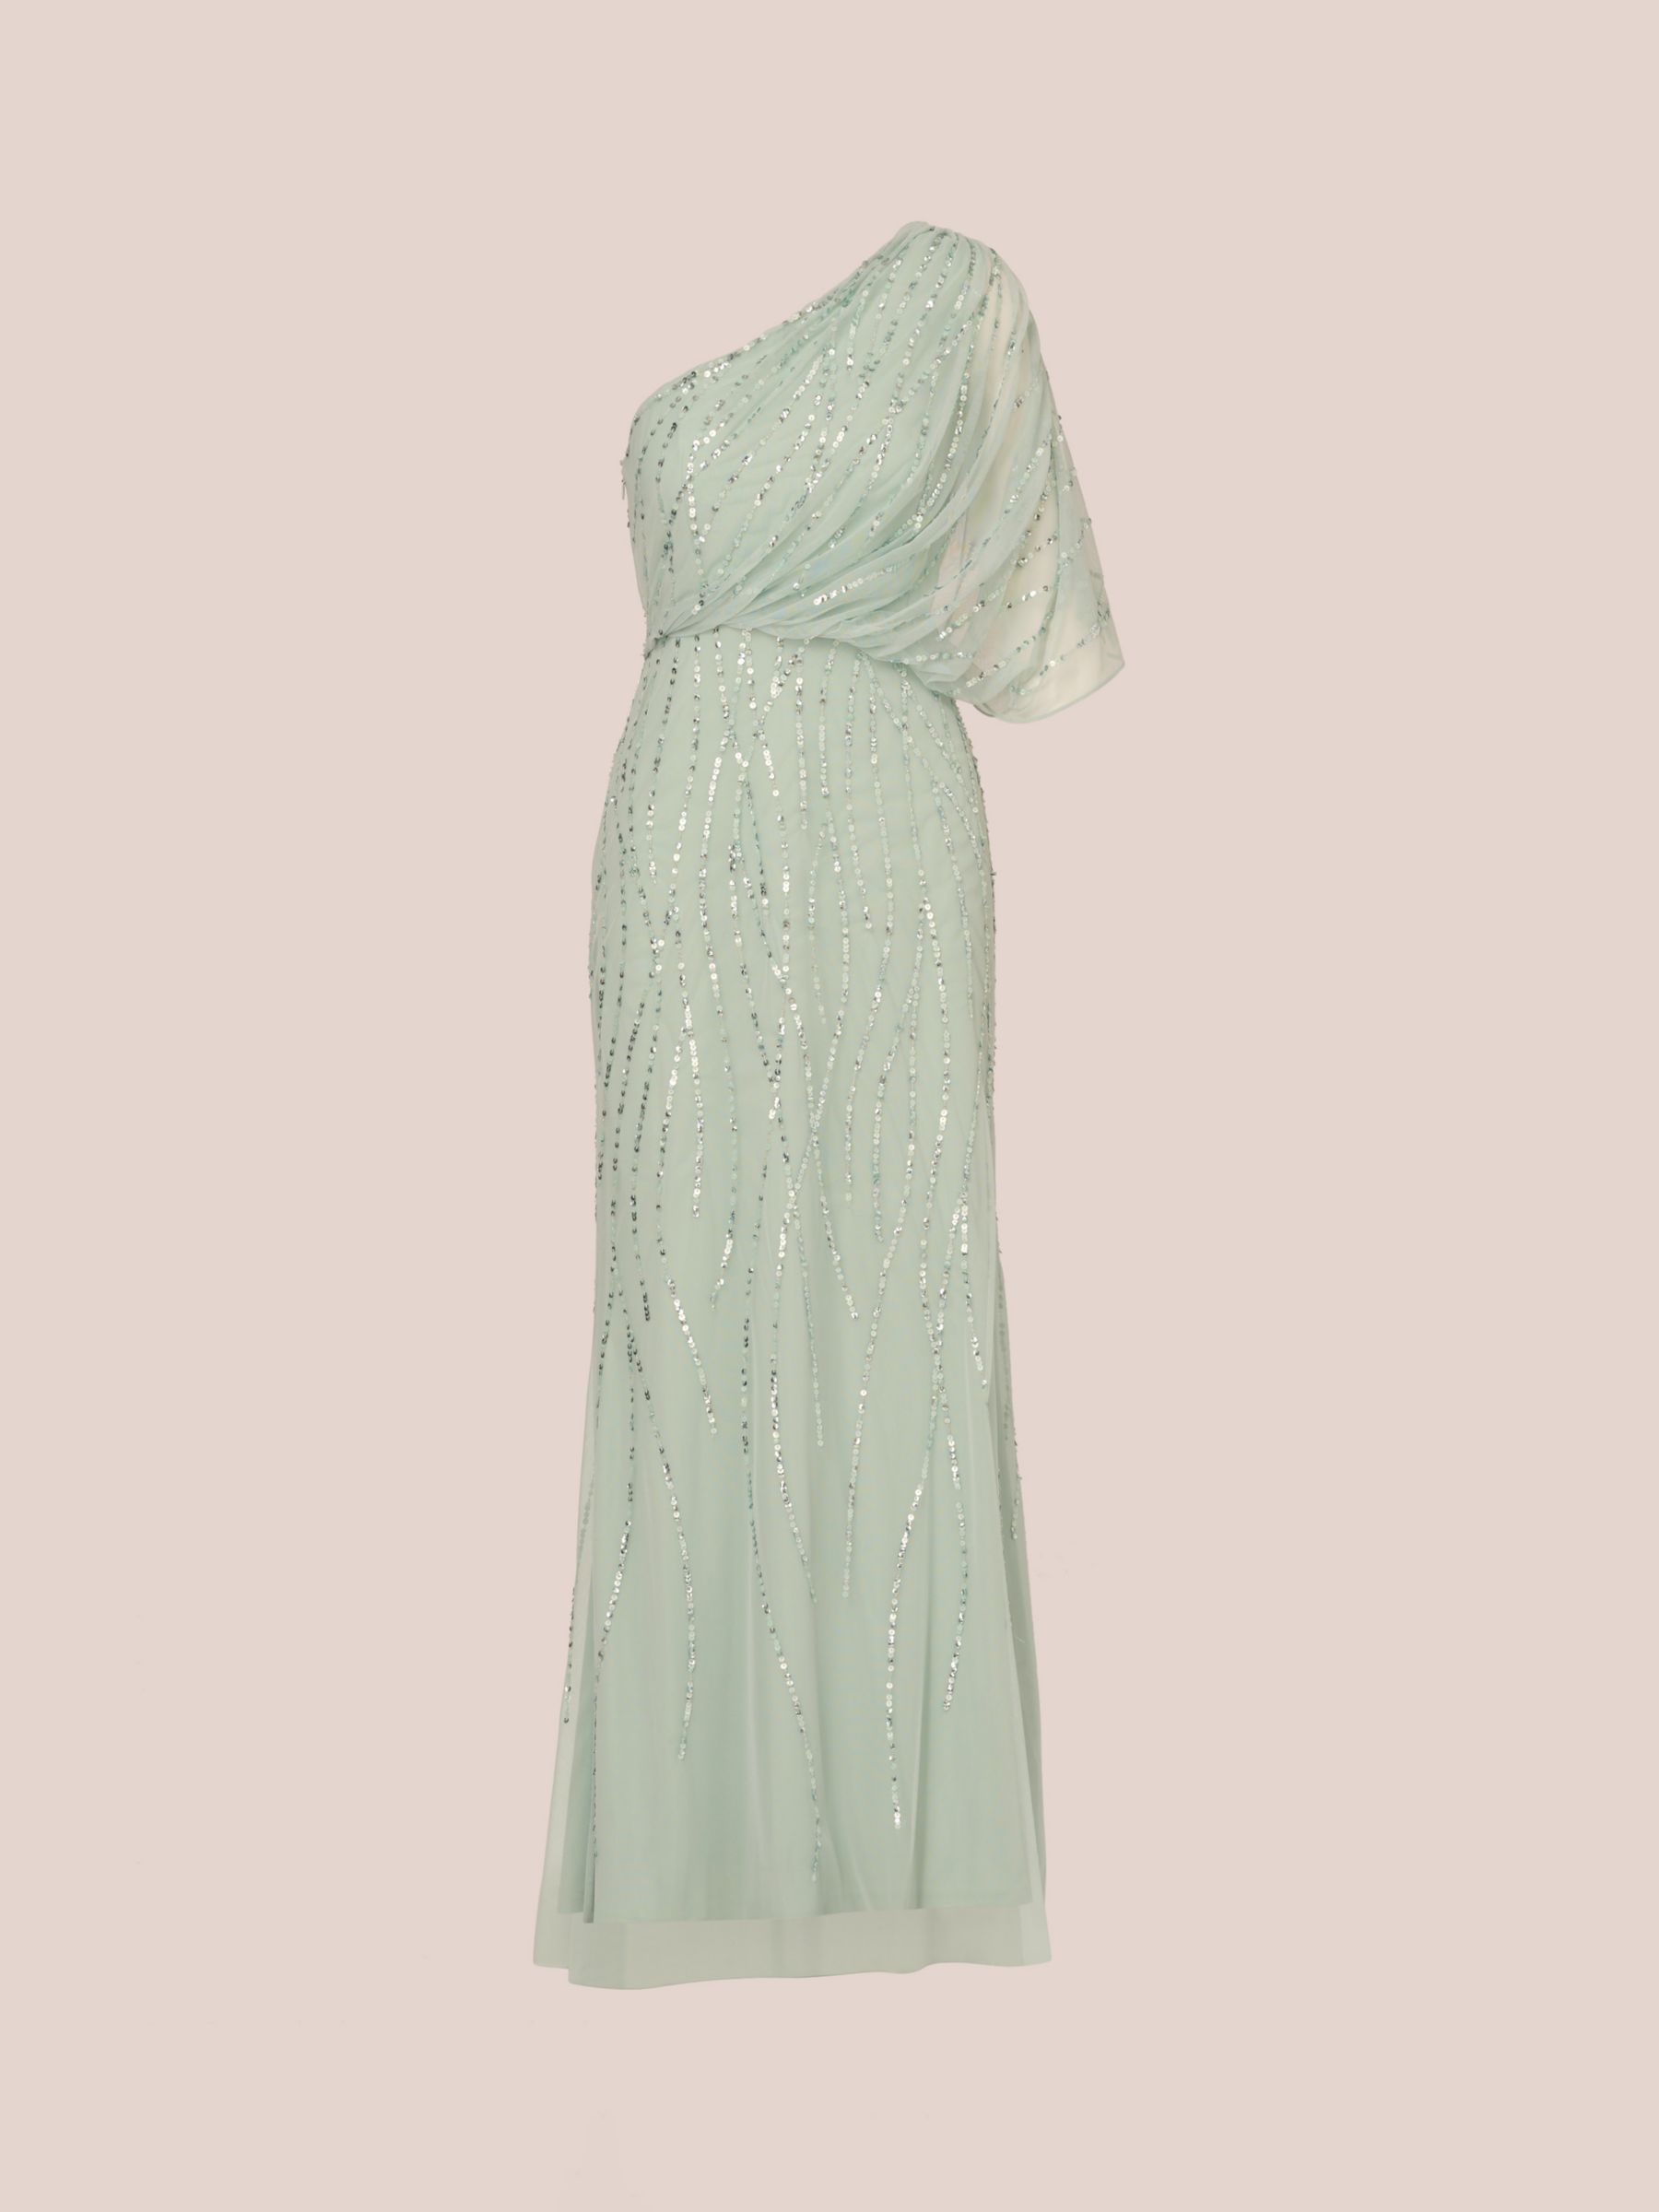 Adrianna Papell Long Beaded Dress, Icy Sage, 6